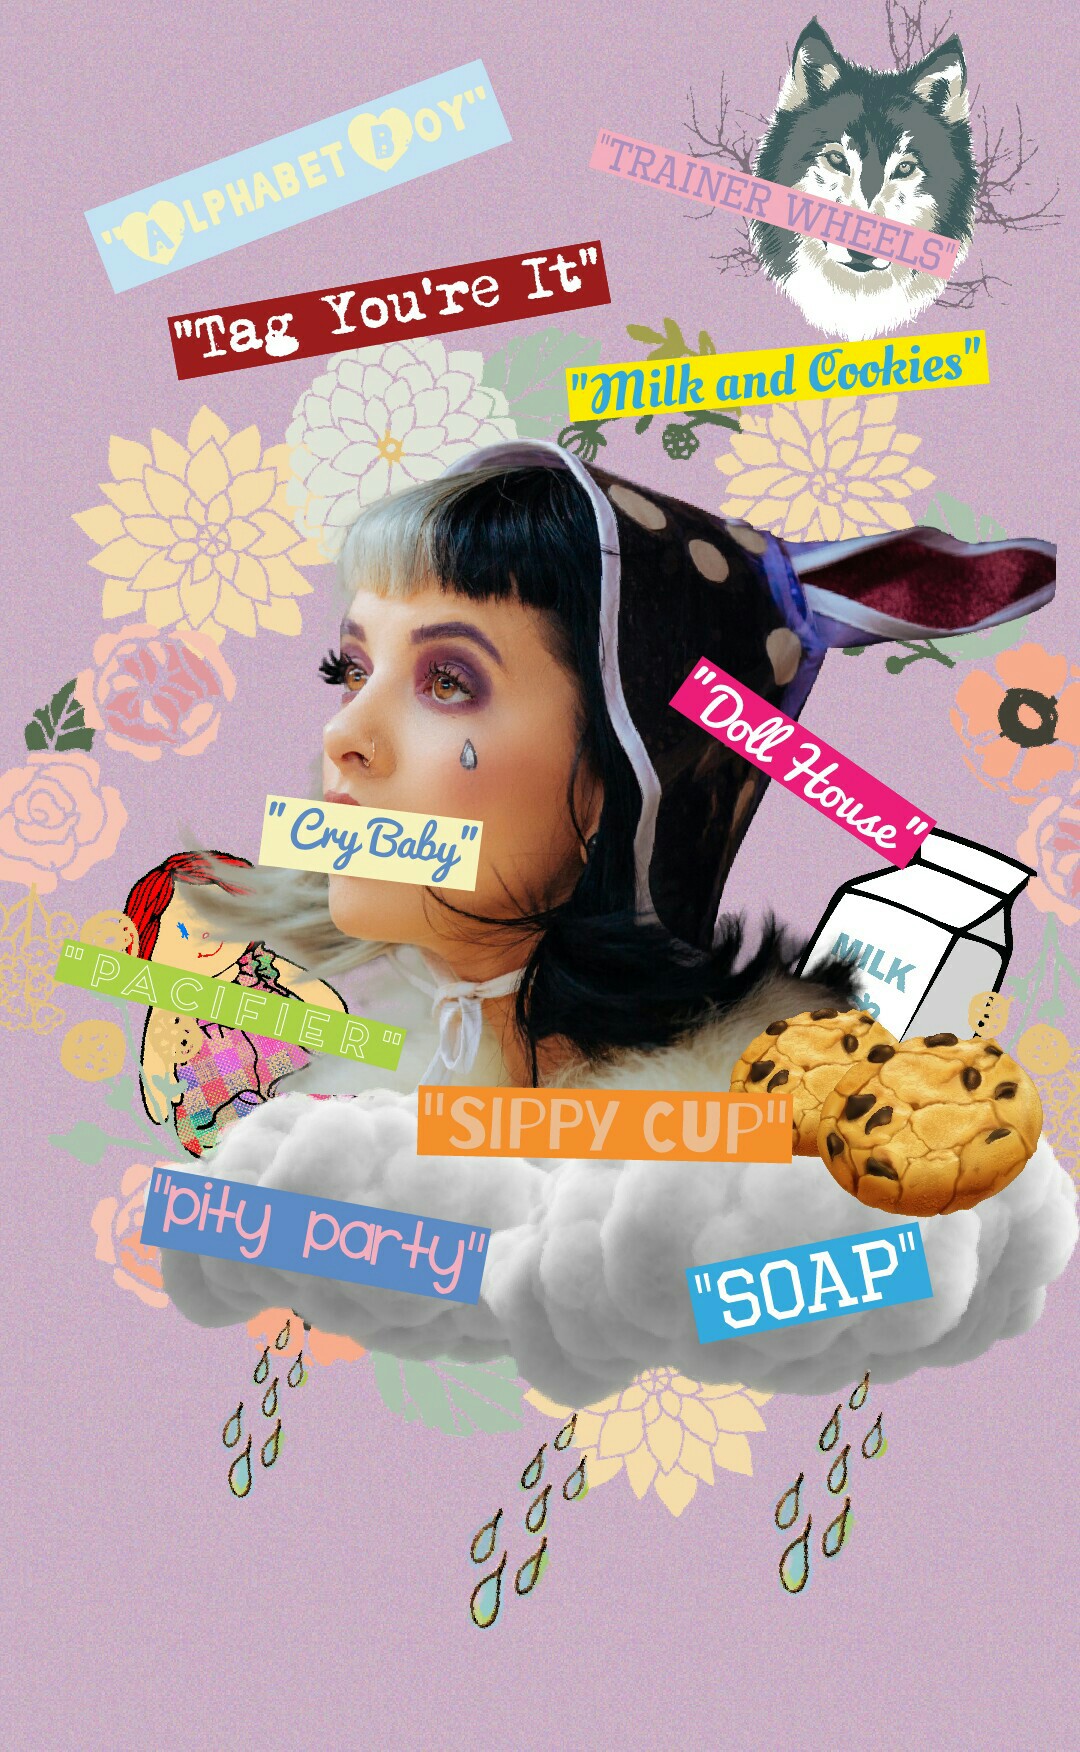 I love exploring different genre of music besides kpop ^^ really into Melanie Martinez her music is creepily cute! i love it (●´∀｀●)